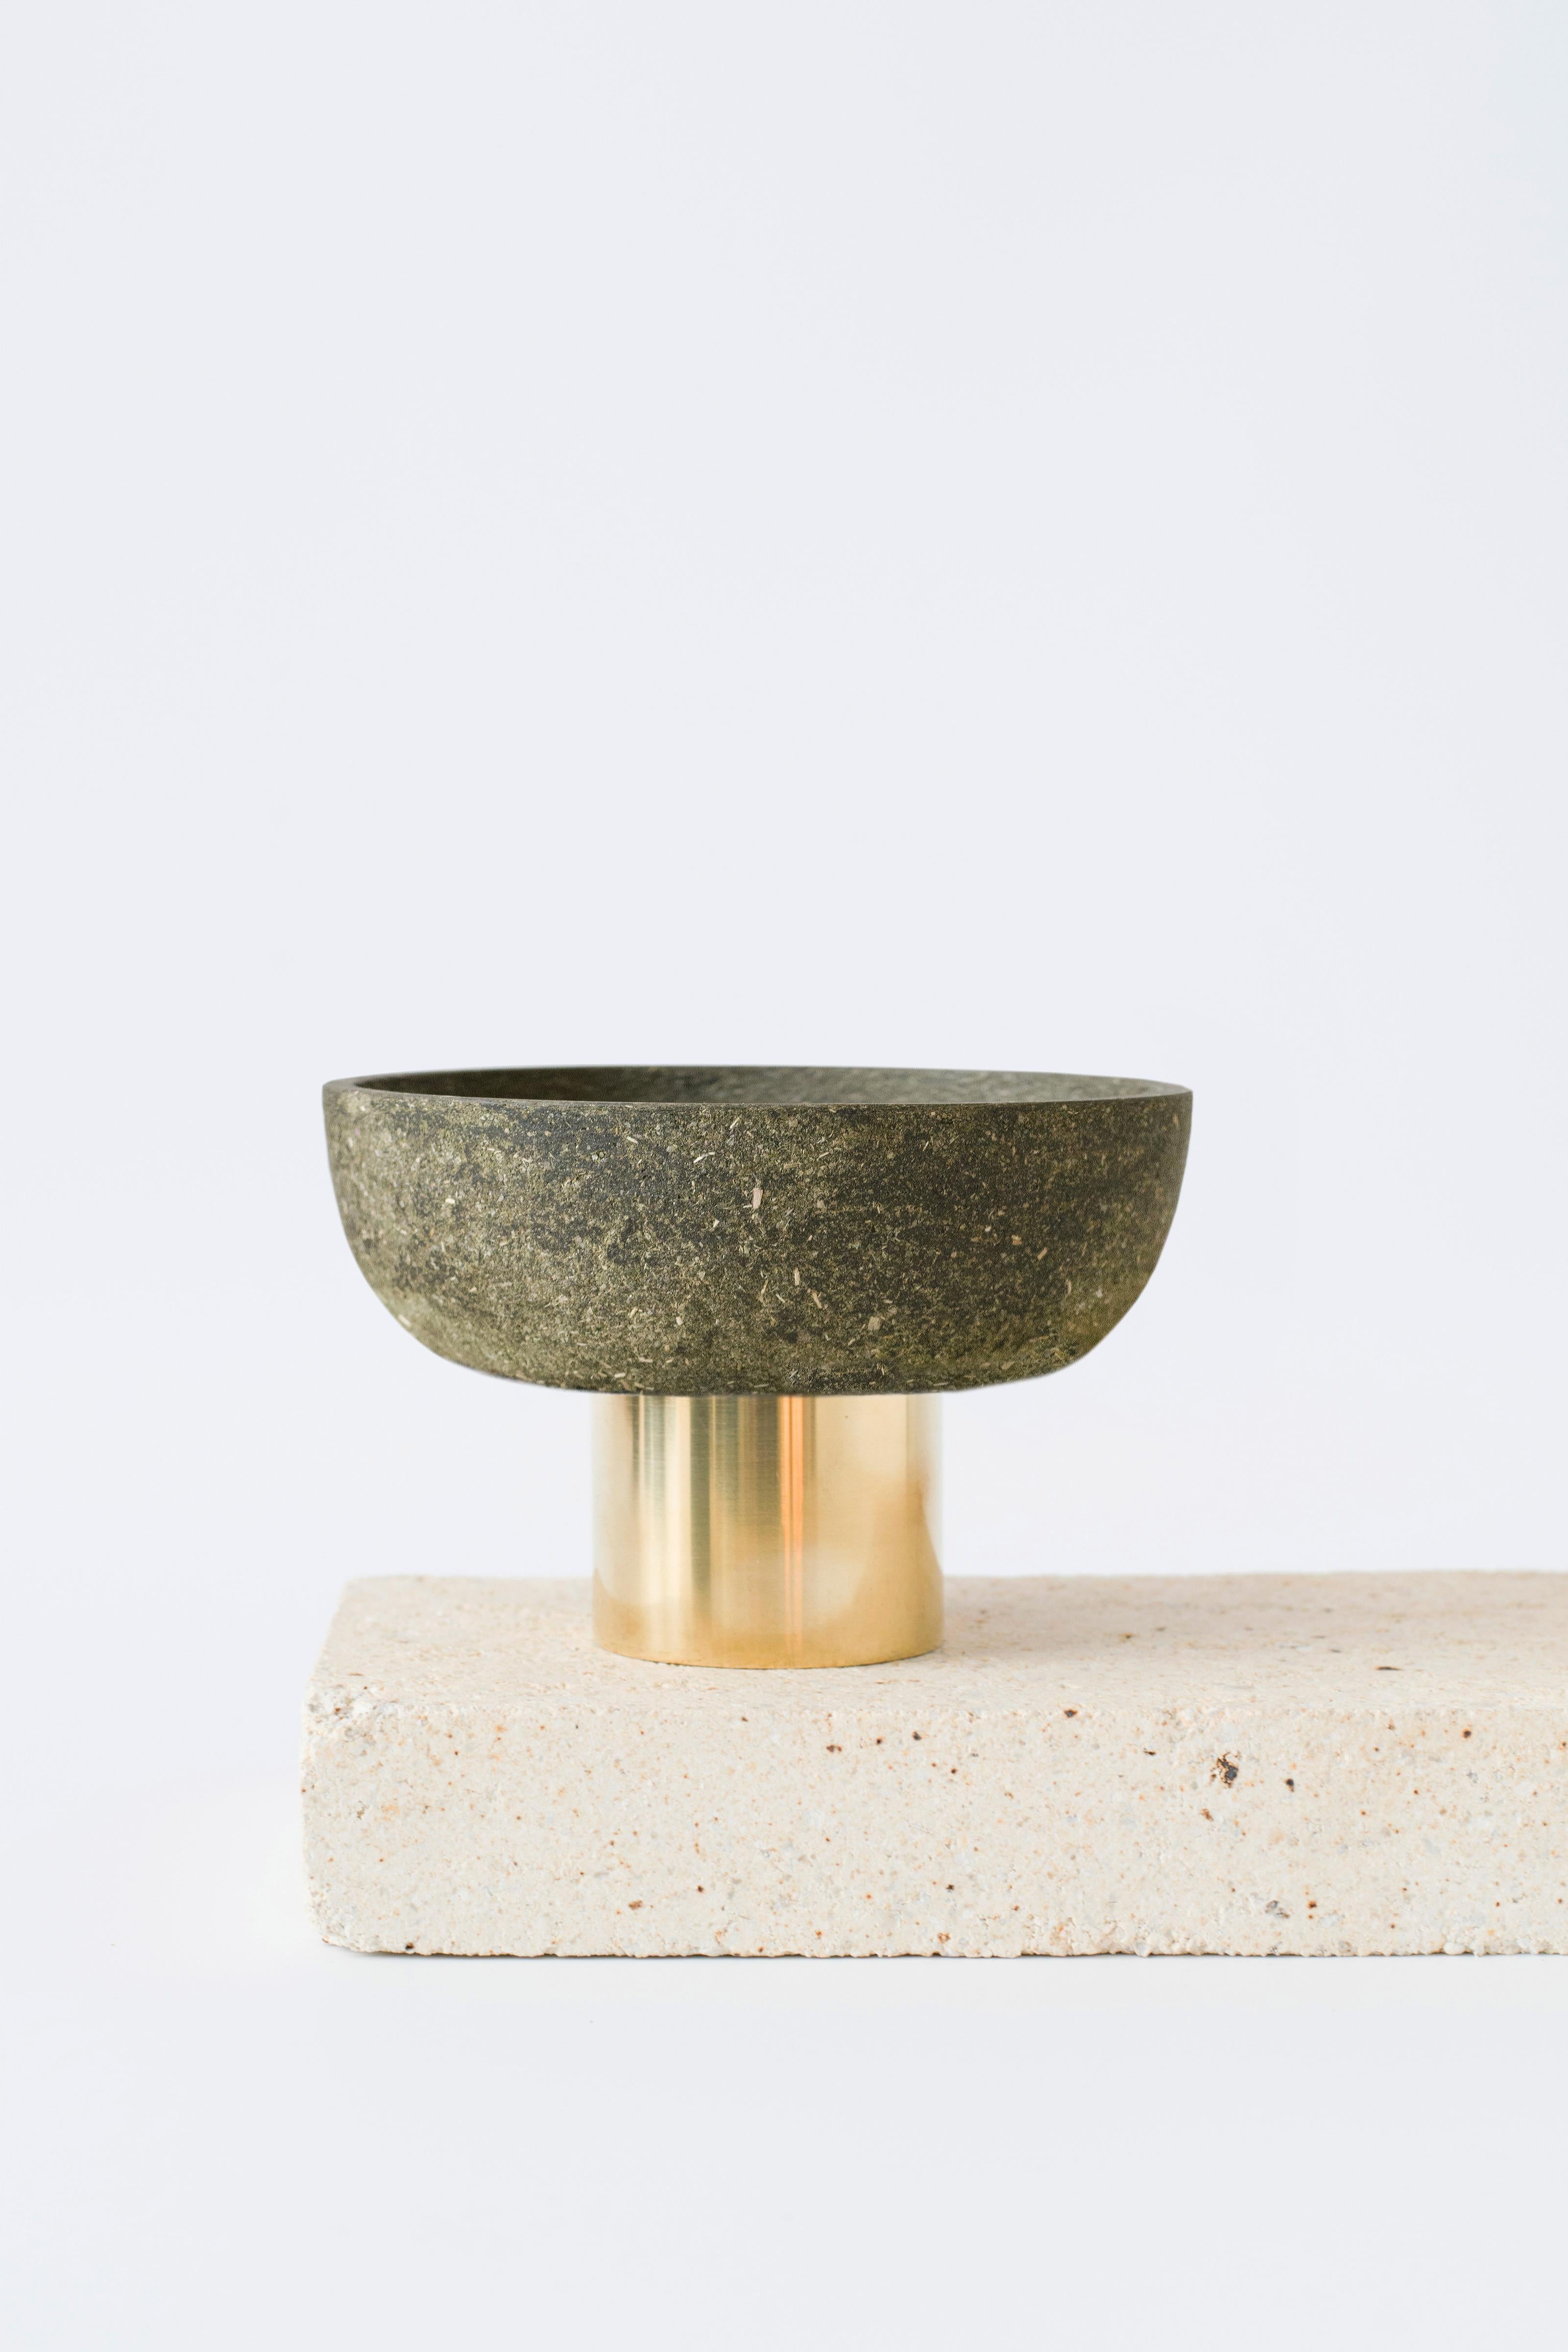 Leaves pedestal bowl by Evelina Kudabaite Studio
Handmade
Materials: tree leaves, brass
Dimensions: H 7.5 x D 12 cm
Colour: green/khaki
Notes: for dry use

Since 2015, product designer Evelina Kudabaite keeps on developing and making GIRIA